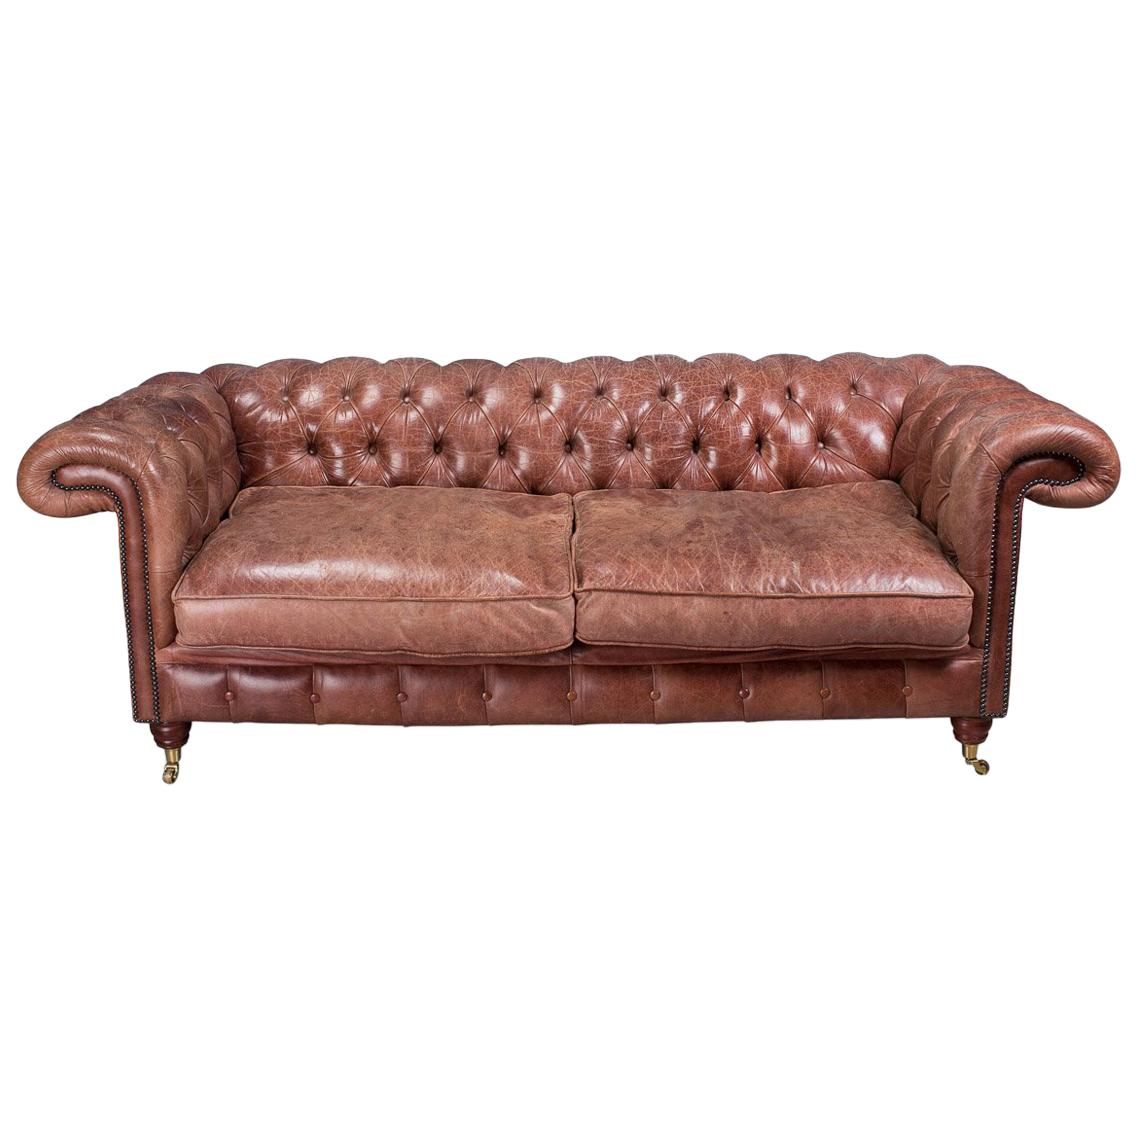 Superb 20th Century Chesterfield Feather Filled Leather Sofa, circa 1990